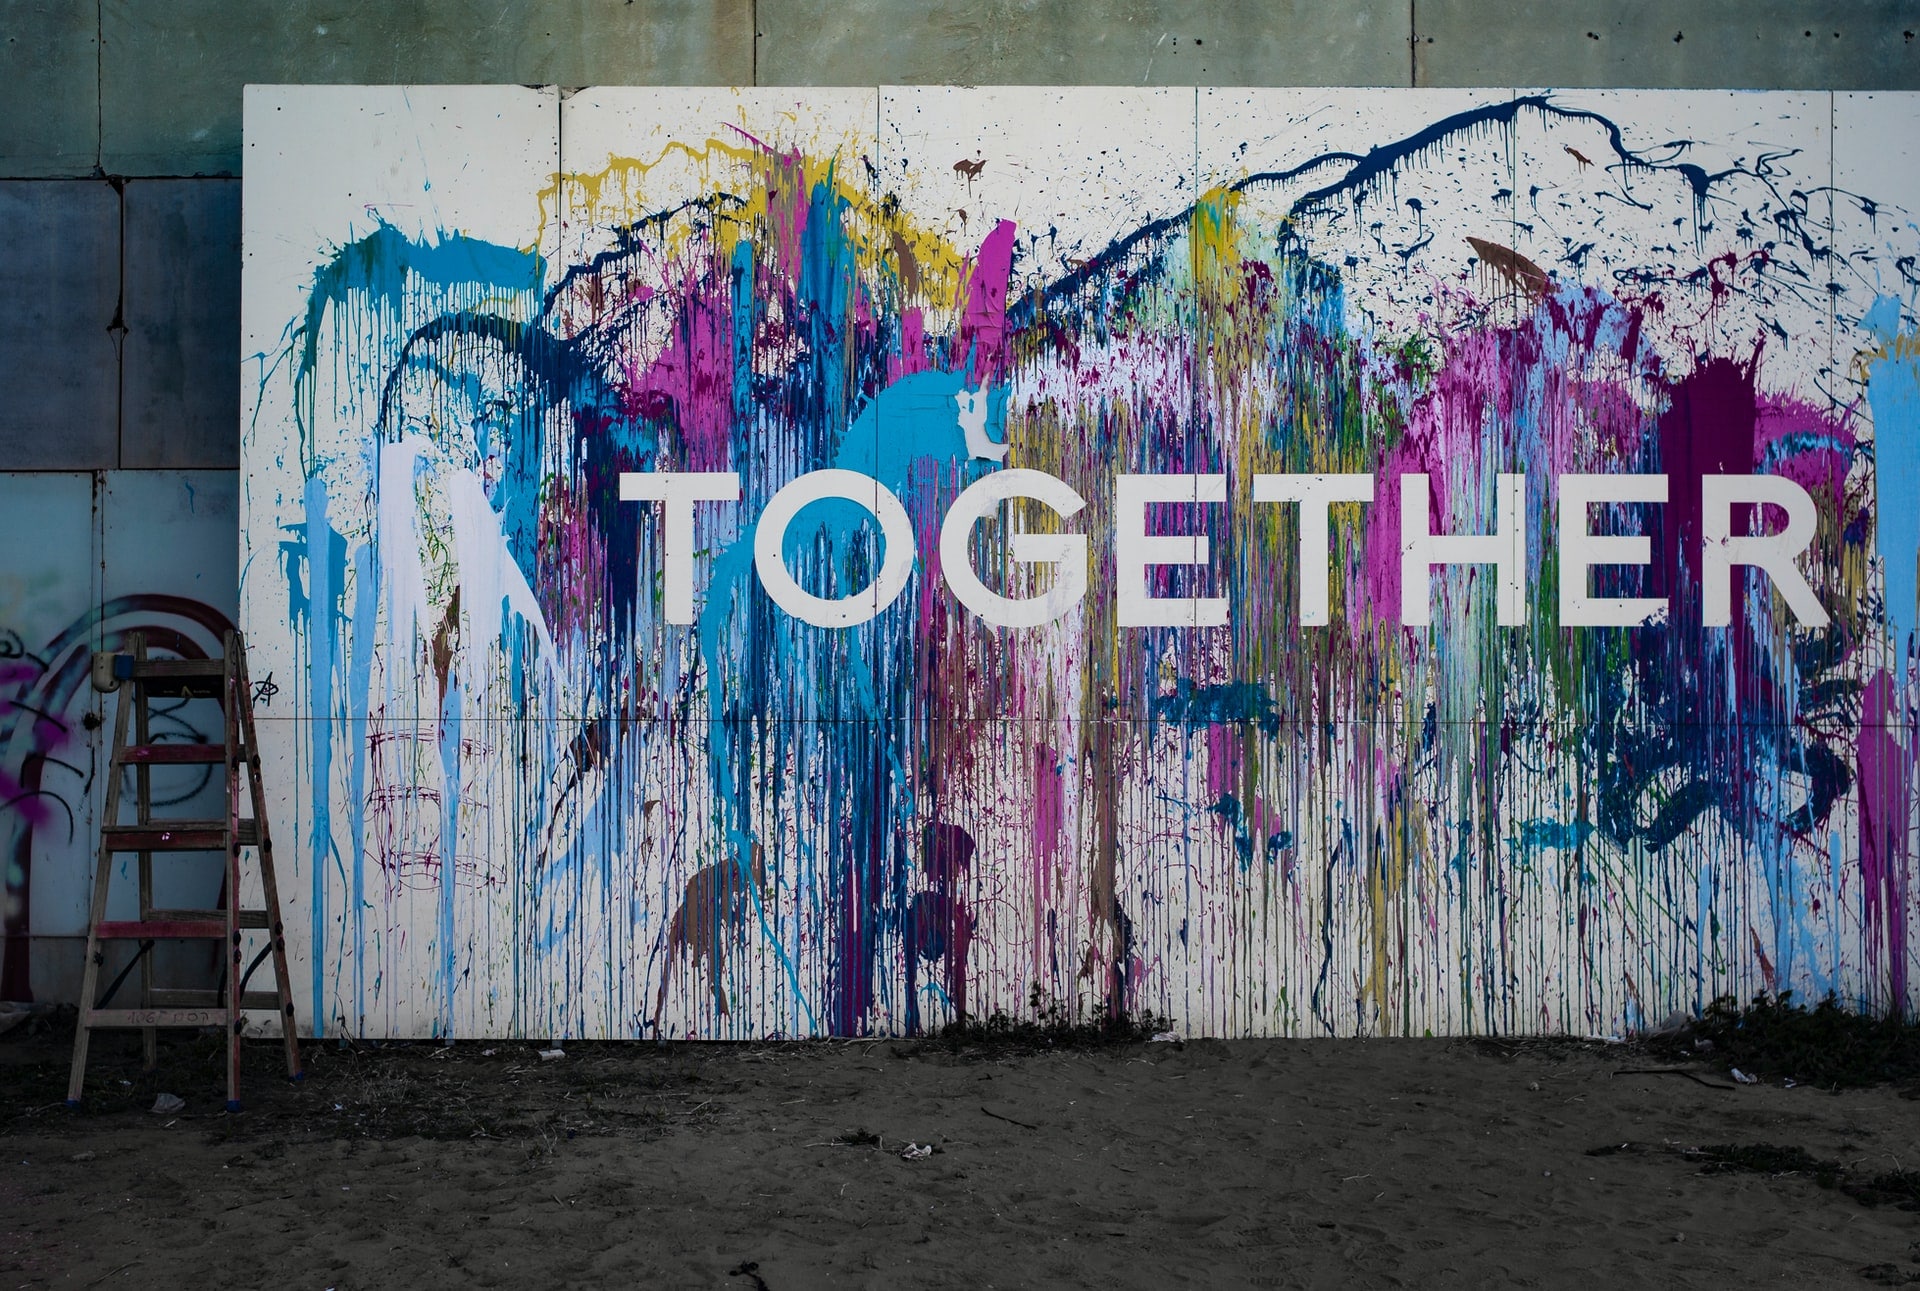 A wall covered in paint splatters with the word "Together" painted on it